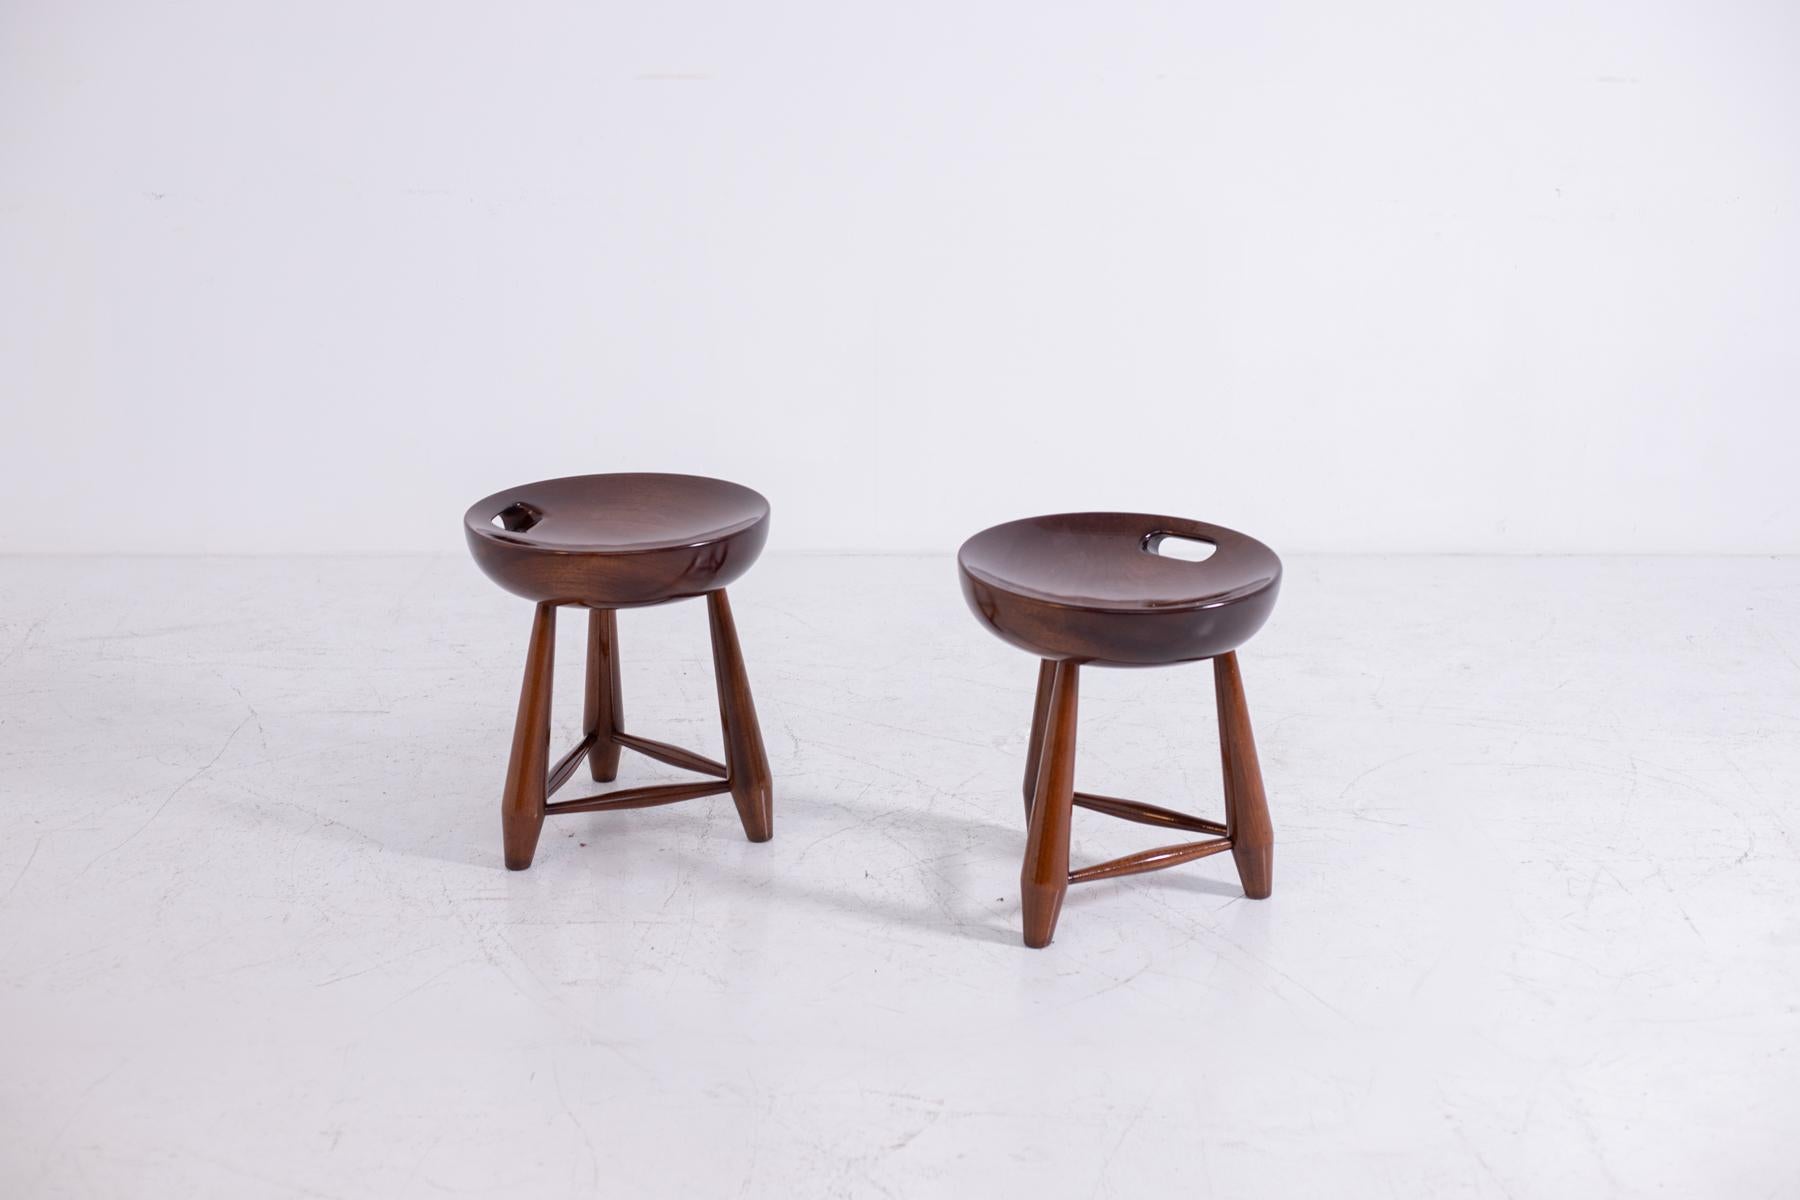 A pair of Sergio Rodrigues' Mocho stools in solid noble wood, circa 1960. Designed in 1954 and produced by the Brazilian company Oca, which Rodrigues founded in 1955. The three-legged Mocho stool is inspired by the traditional cow stools used in